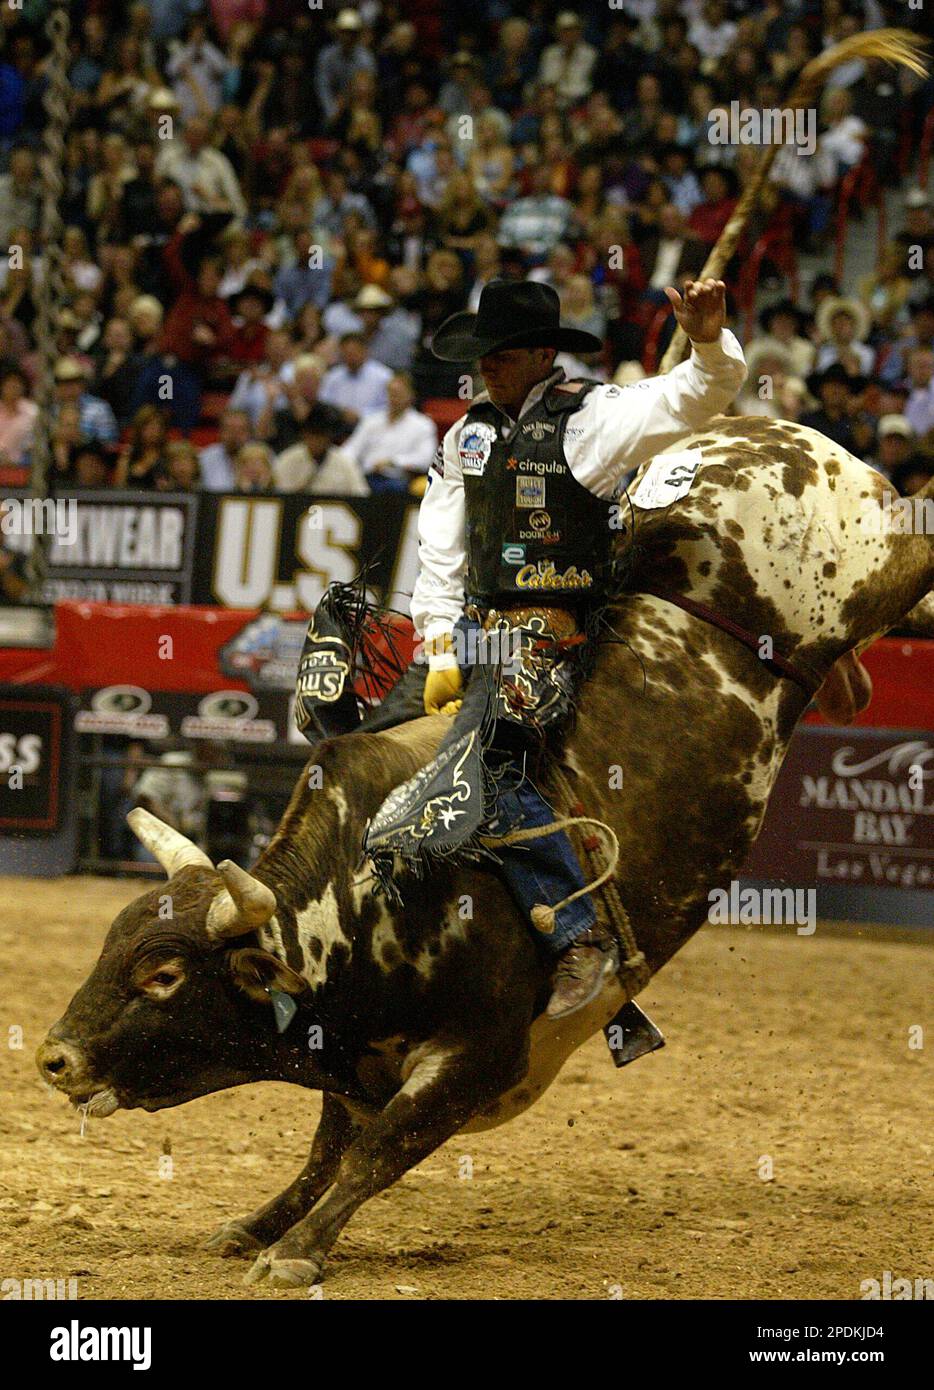 Justin McBride, of Elk City, Okla., hangs on a bull as he competes during the sixth round of Professional Bull Riders World Finals in Las Vegas on Saturday, Nov. 5, 2005. McBride, who scored 87.25 Saturday, is leading the competition in overall points. (AP Photo/Jae C. Hong) Stock Photo